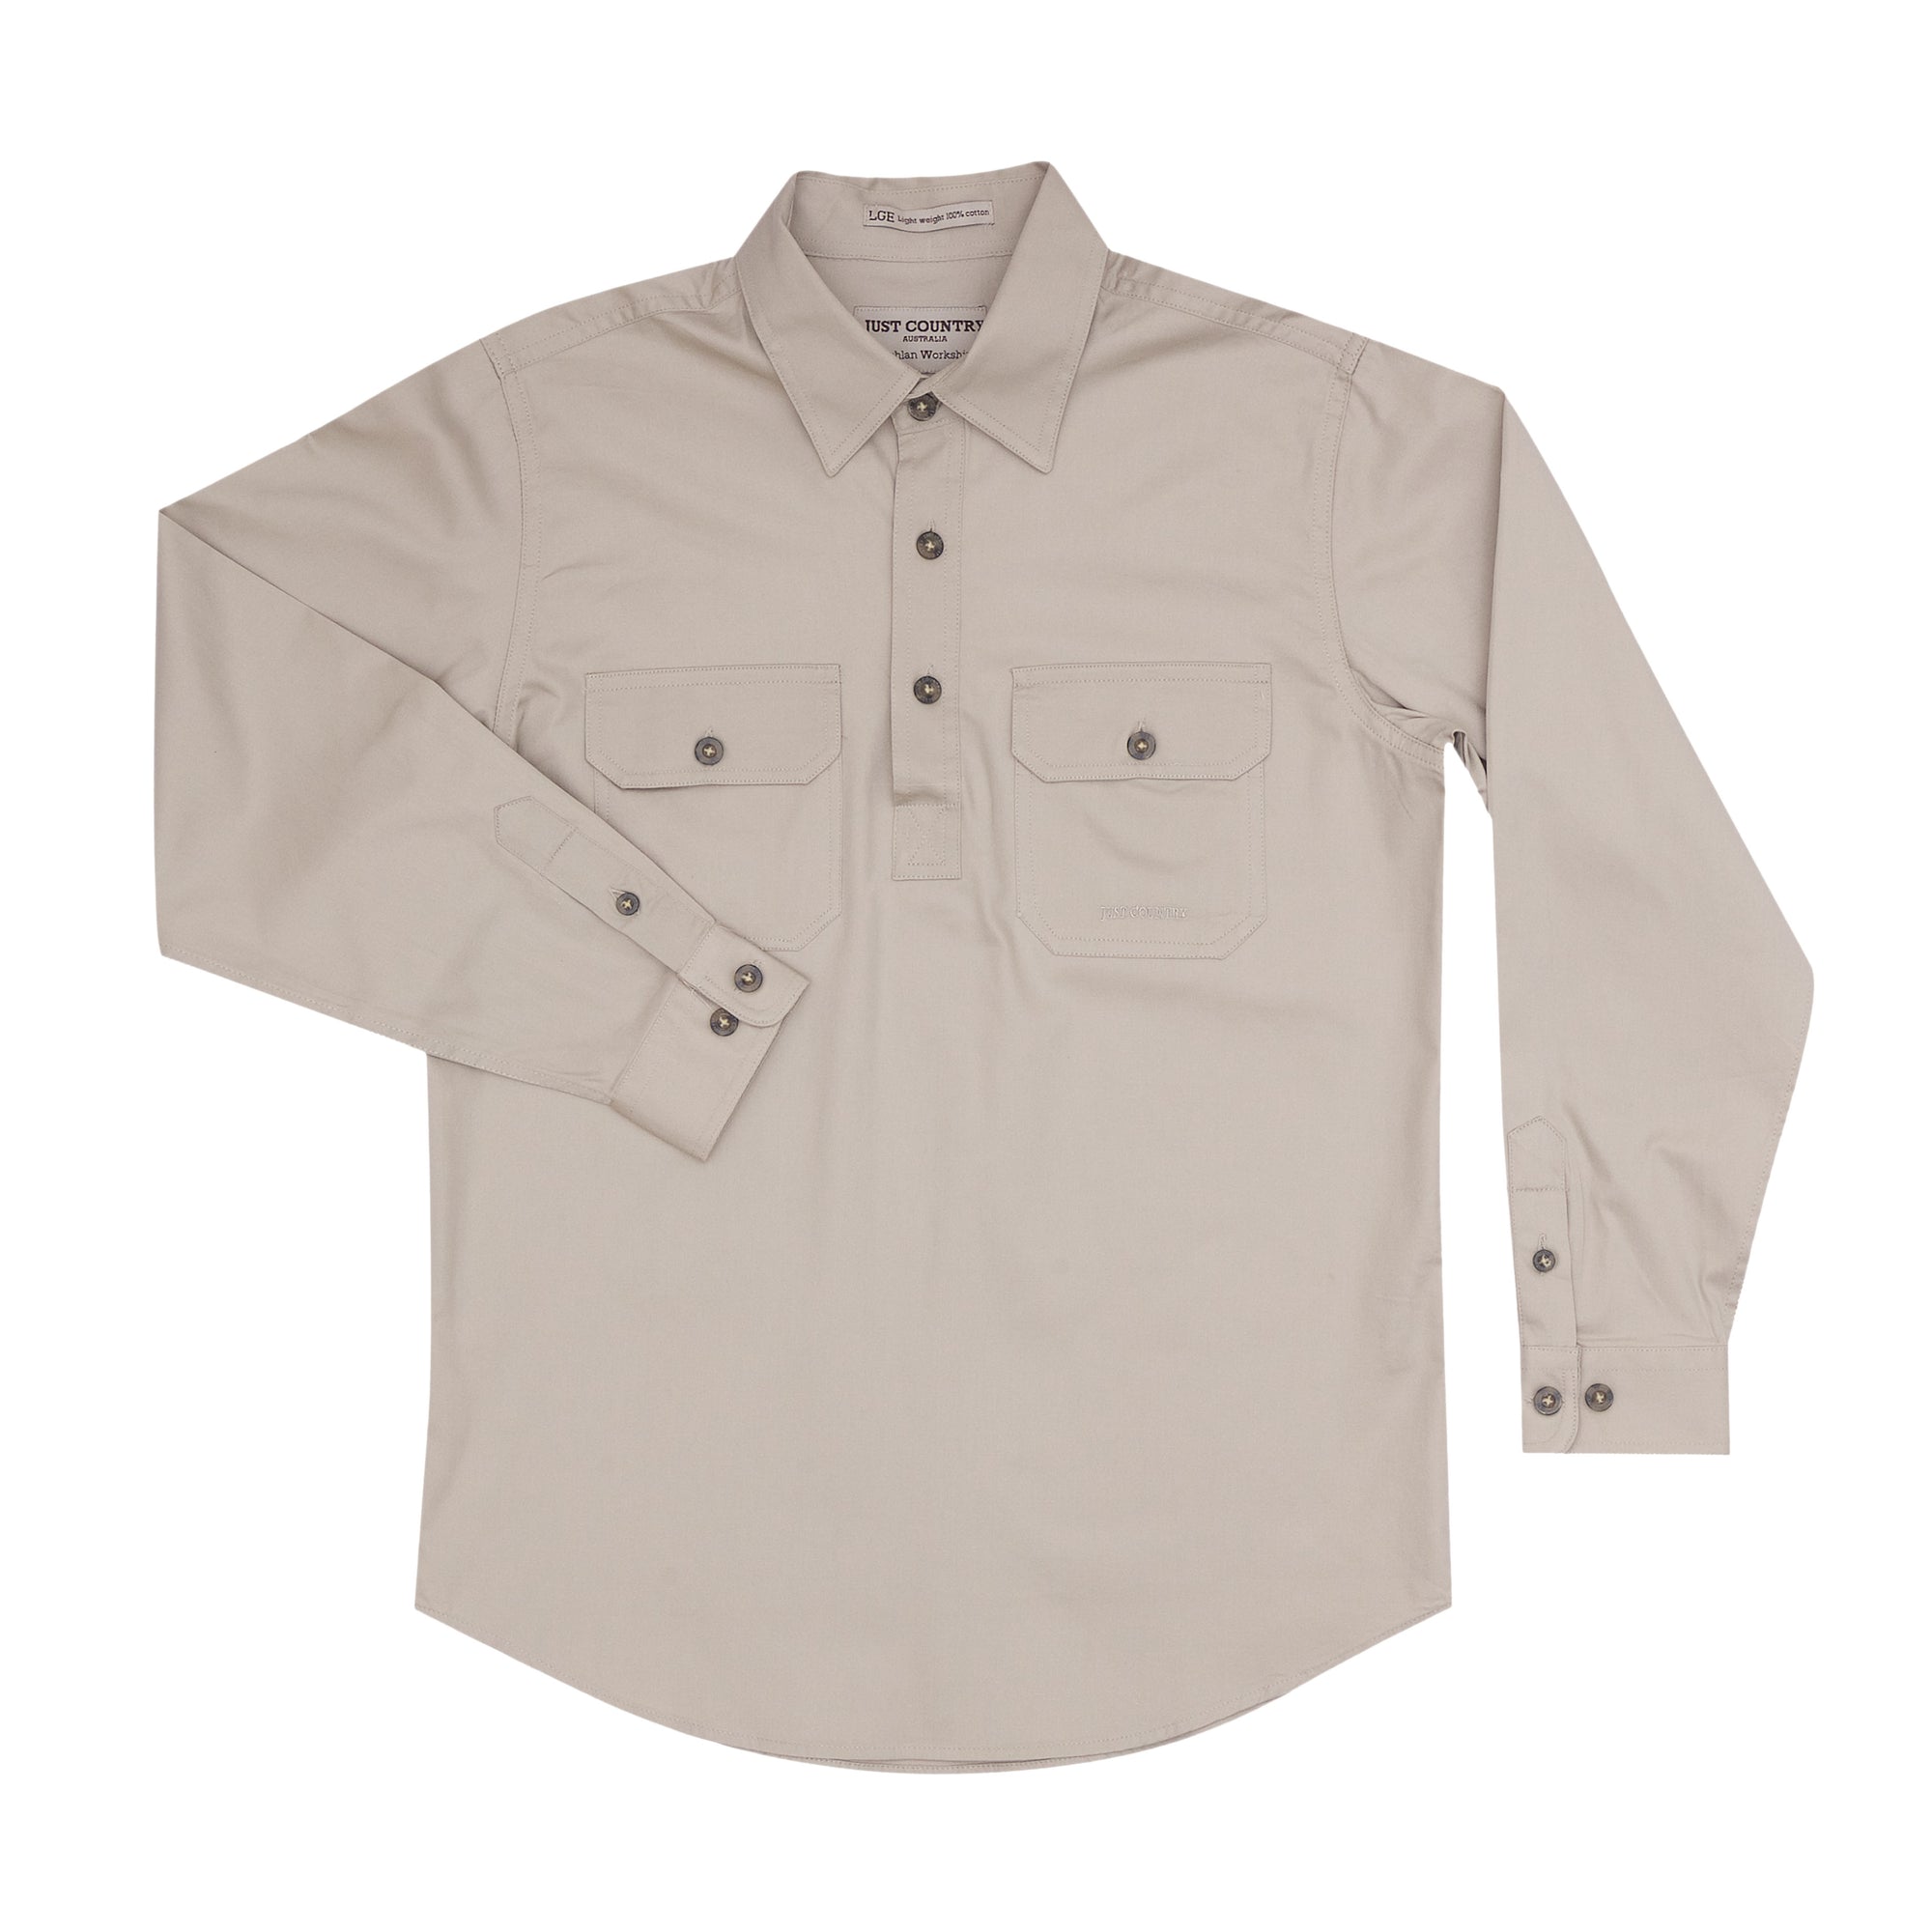 Just Country Workshirt Boys Lachlan Stone